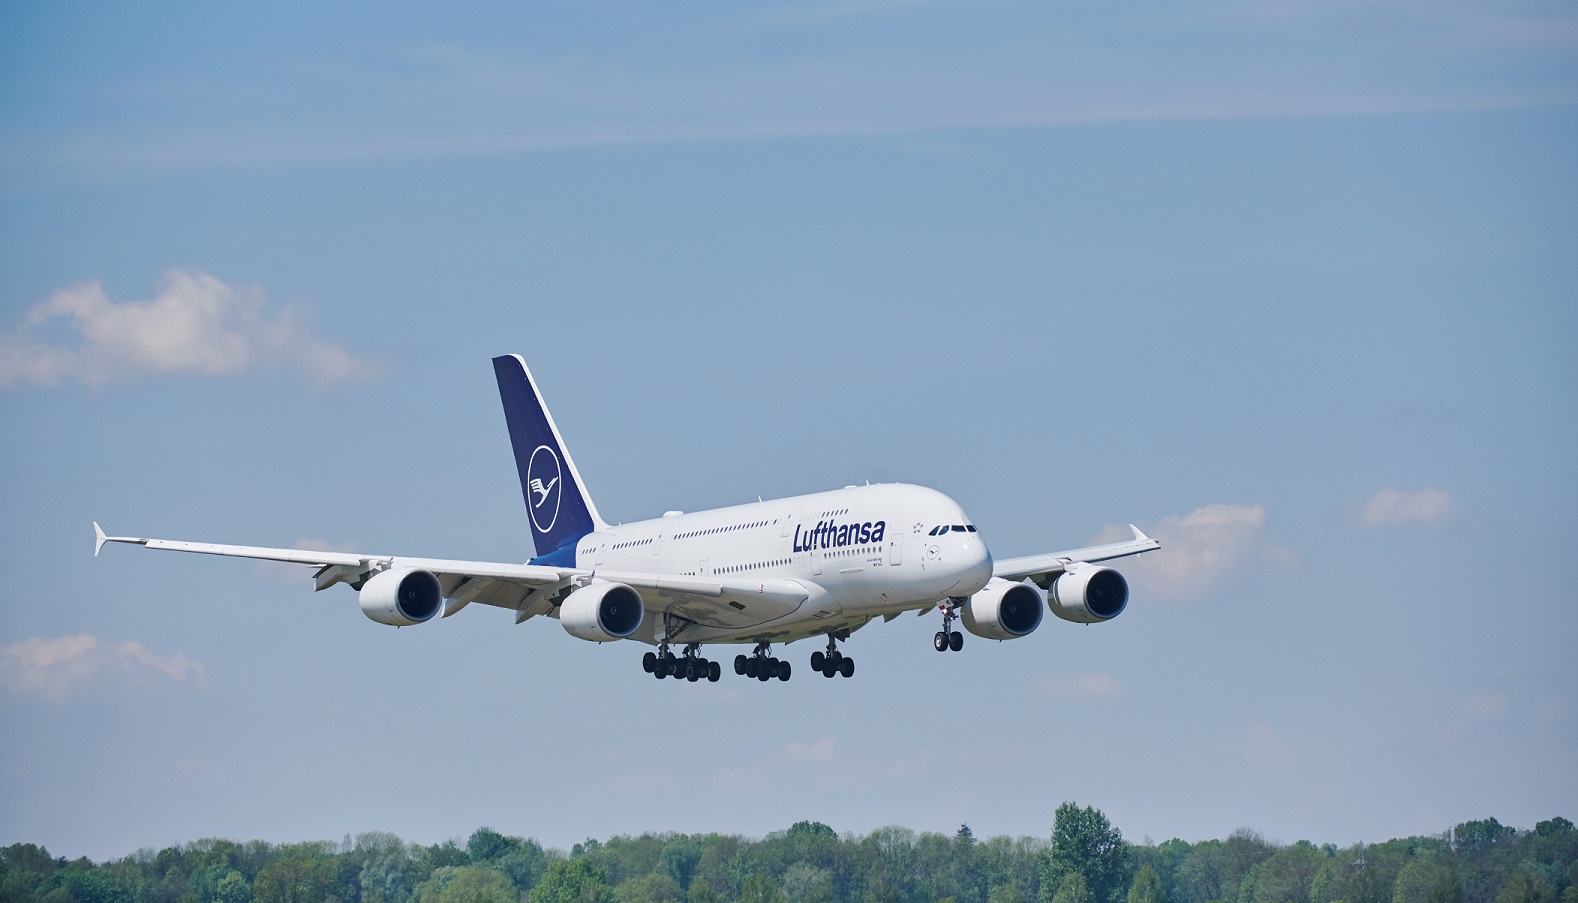 Shell, Lufthansa Announce One of the Largest-Ever Sustainable Aviation Fuel Deals